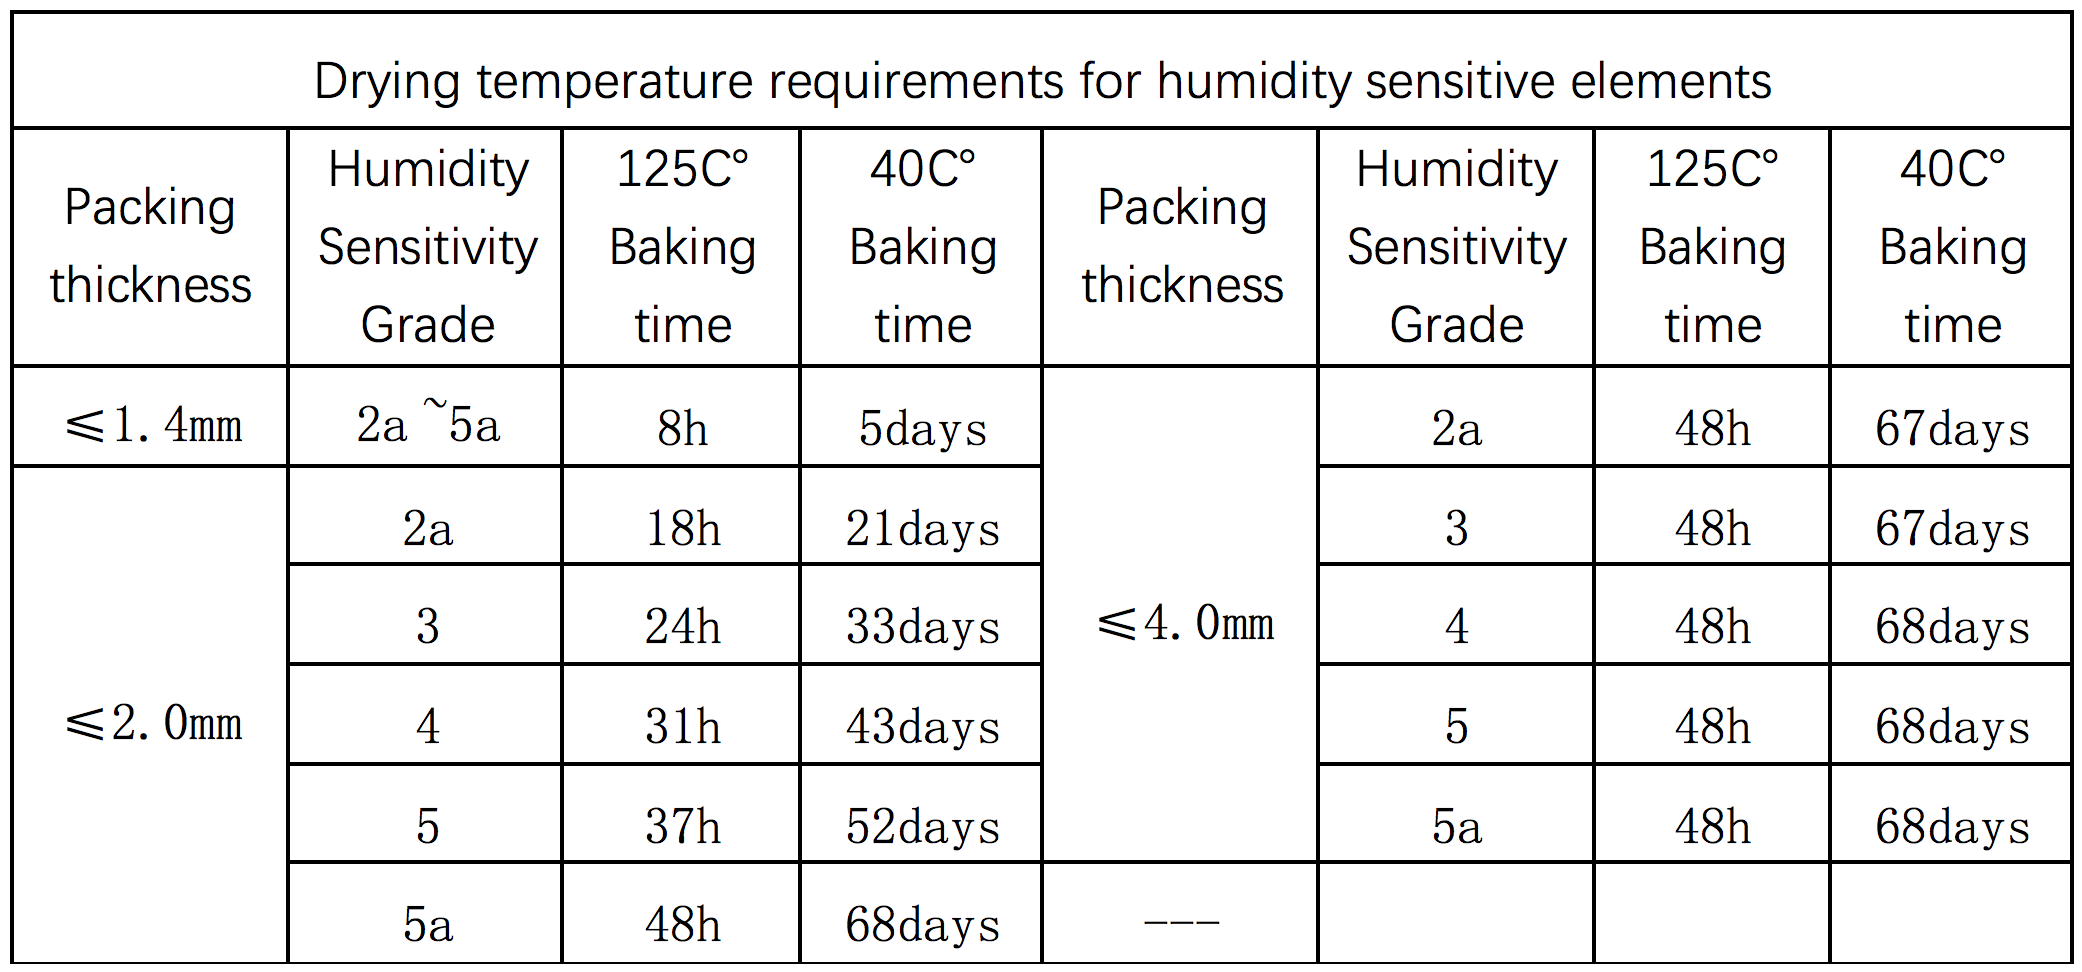 Drying temperature requirements for humidity sensitive elements